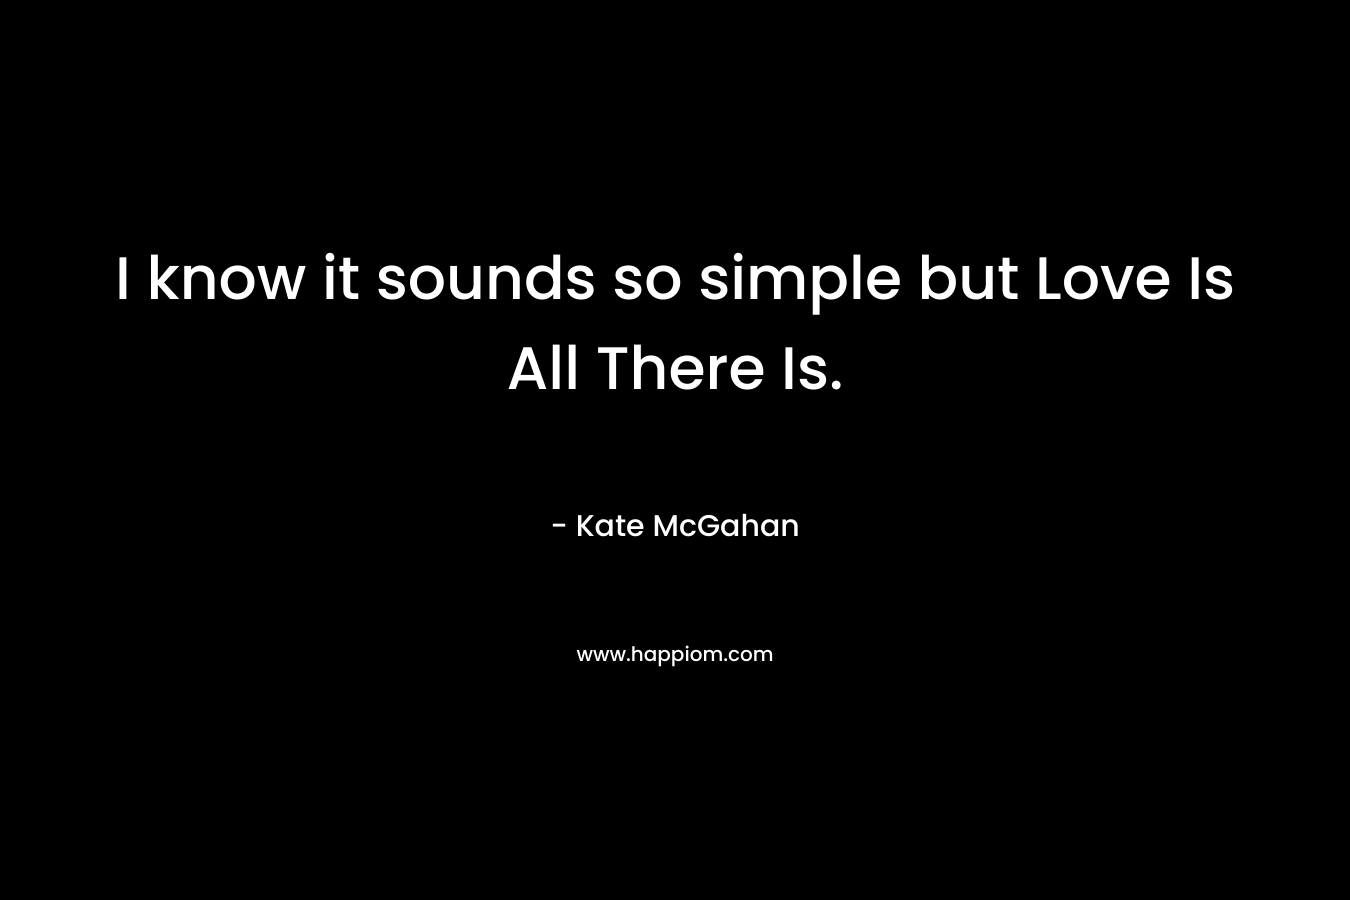 I know it sounds so simple but Love Is All There Is.